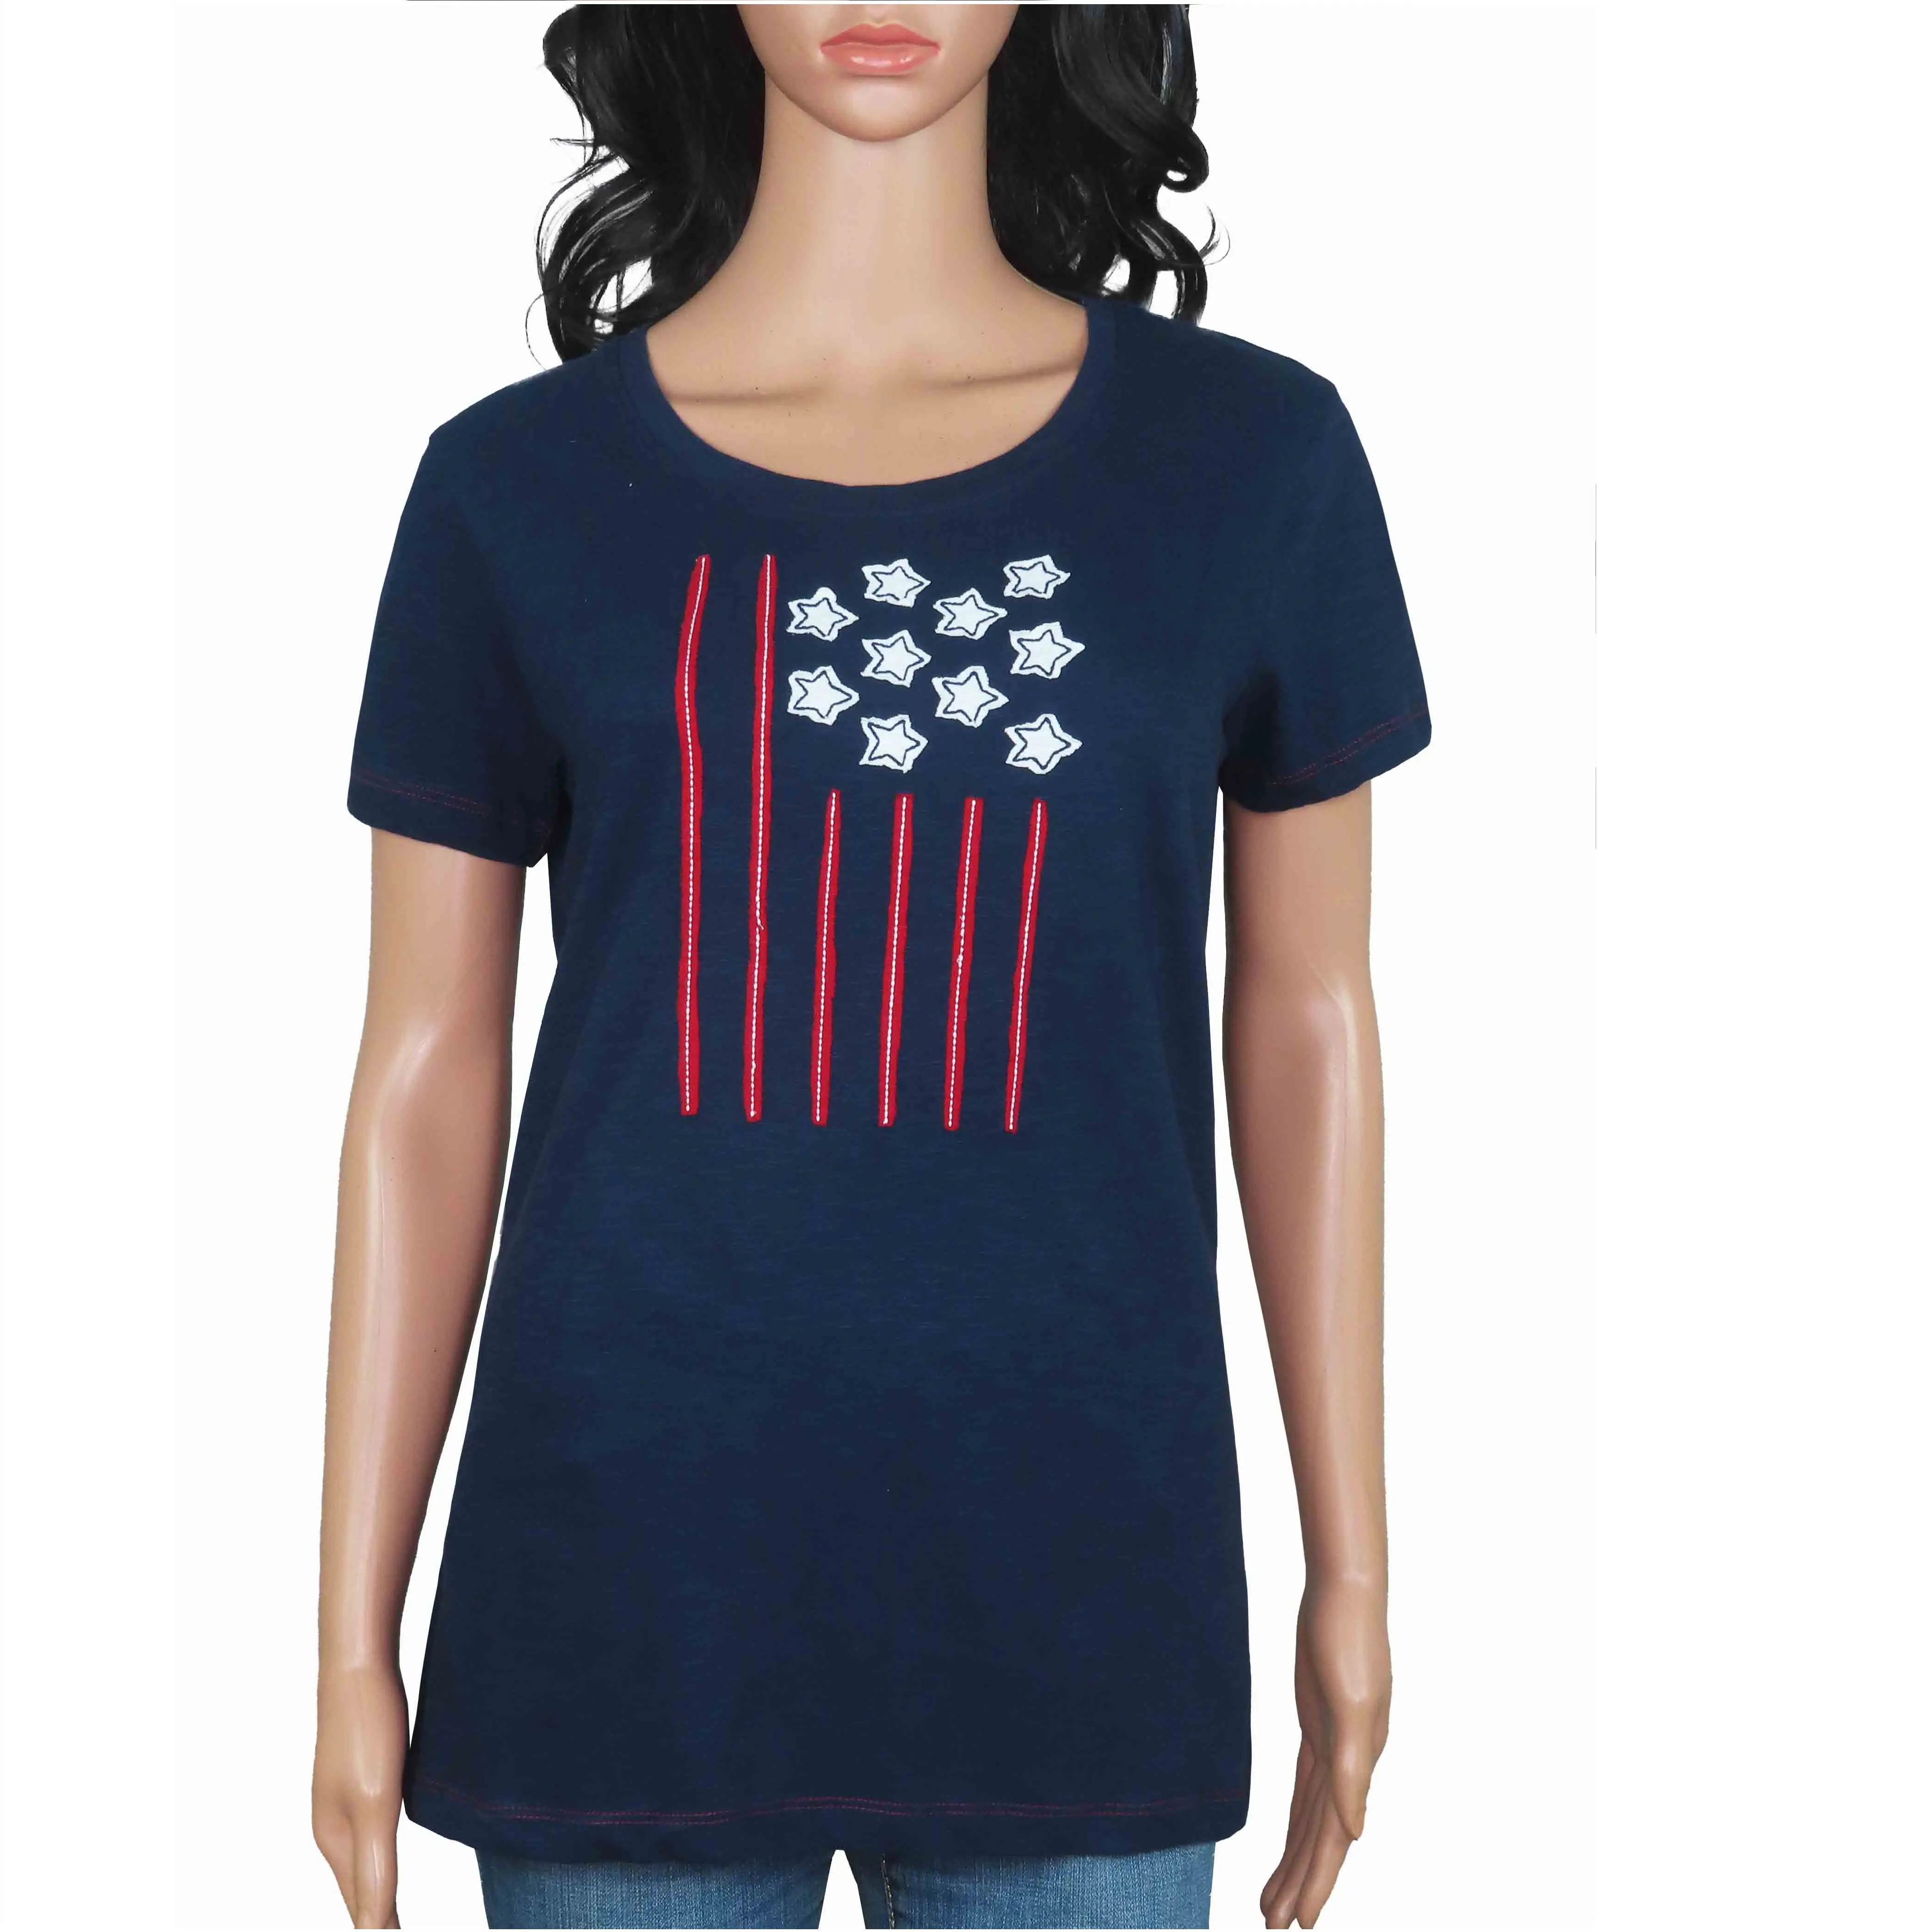 Export Surplus Wholesale Ladies Navy T Shirt Stocklot from India High Quality Garments at Affordable Prices Womens Collection